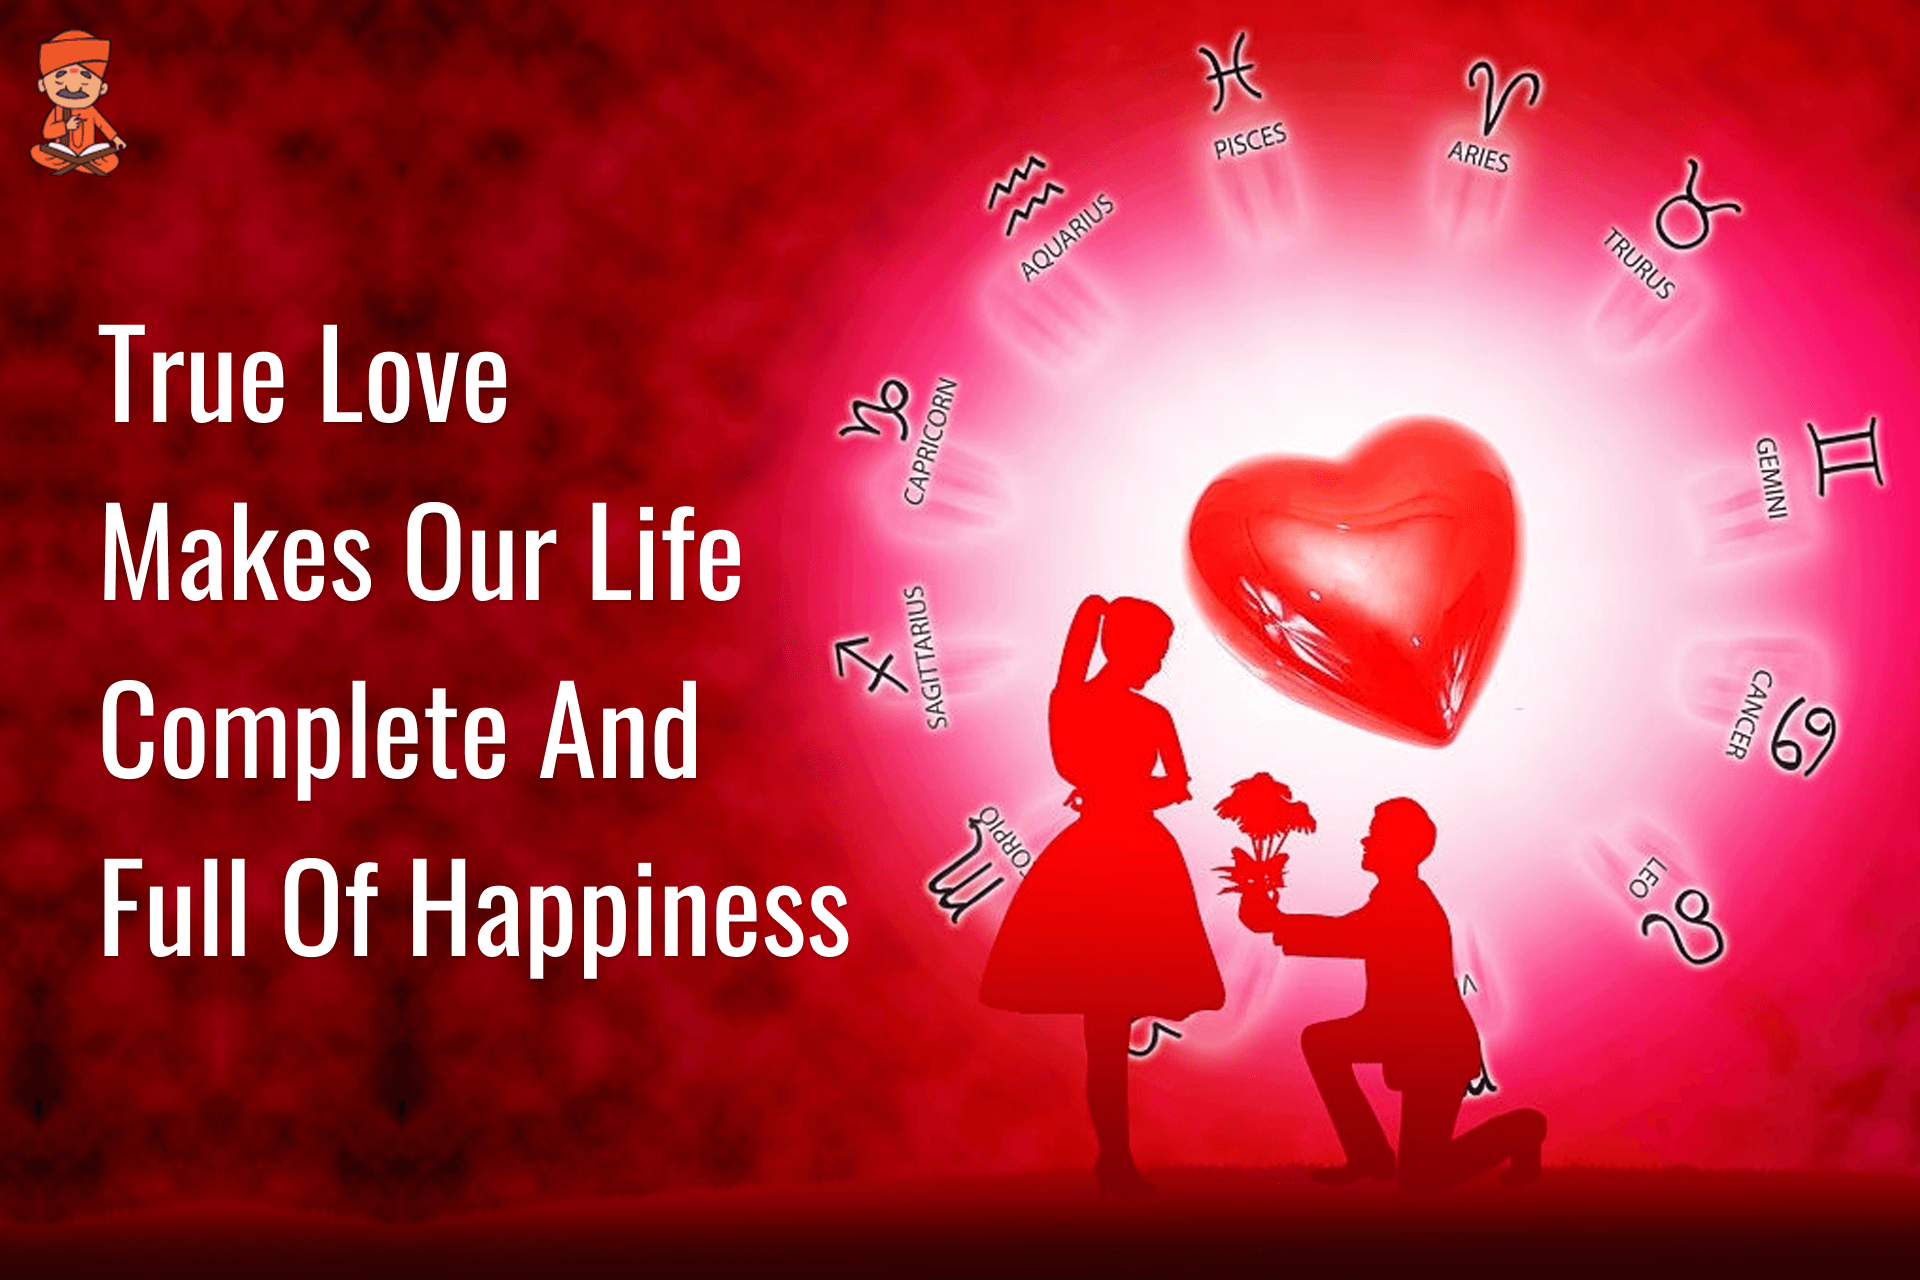 True Love Makes Our Life Complete And Full Of Happiness